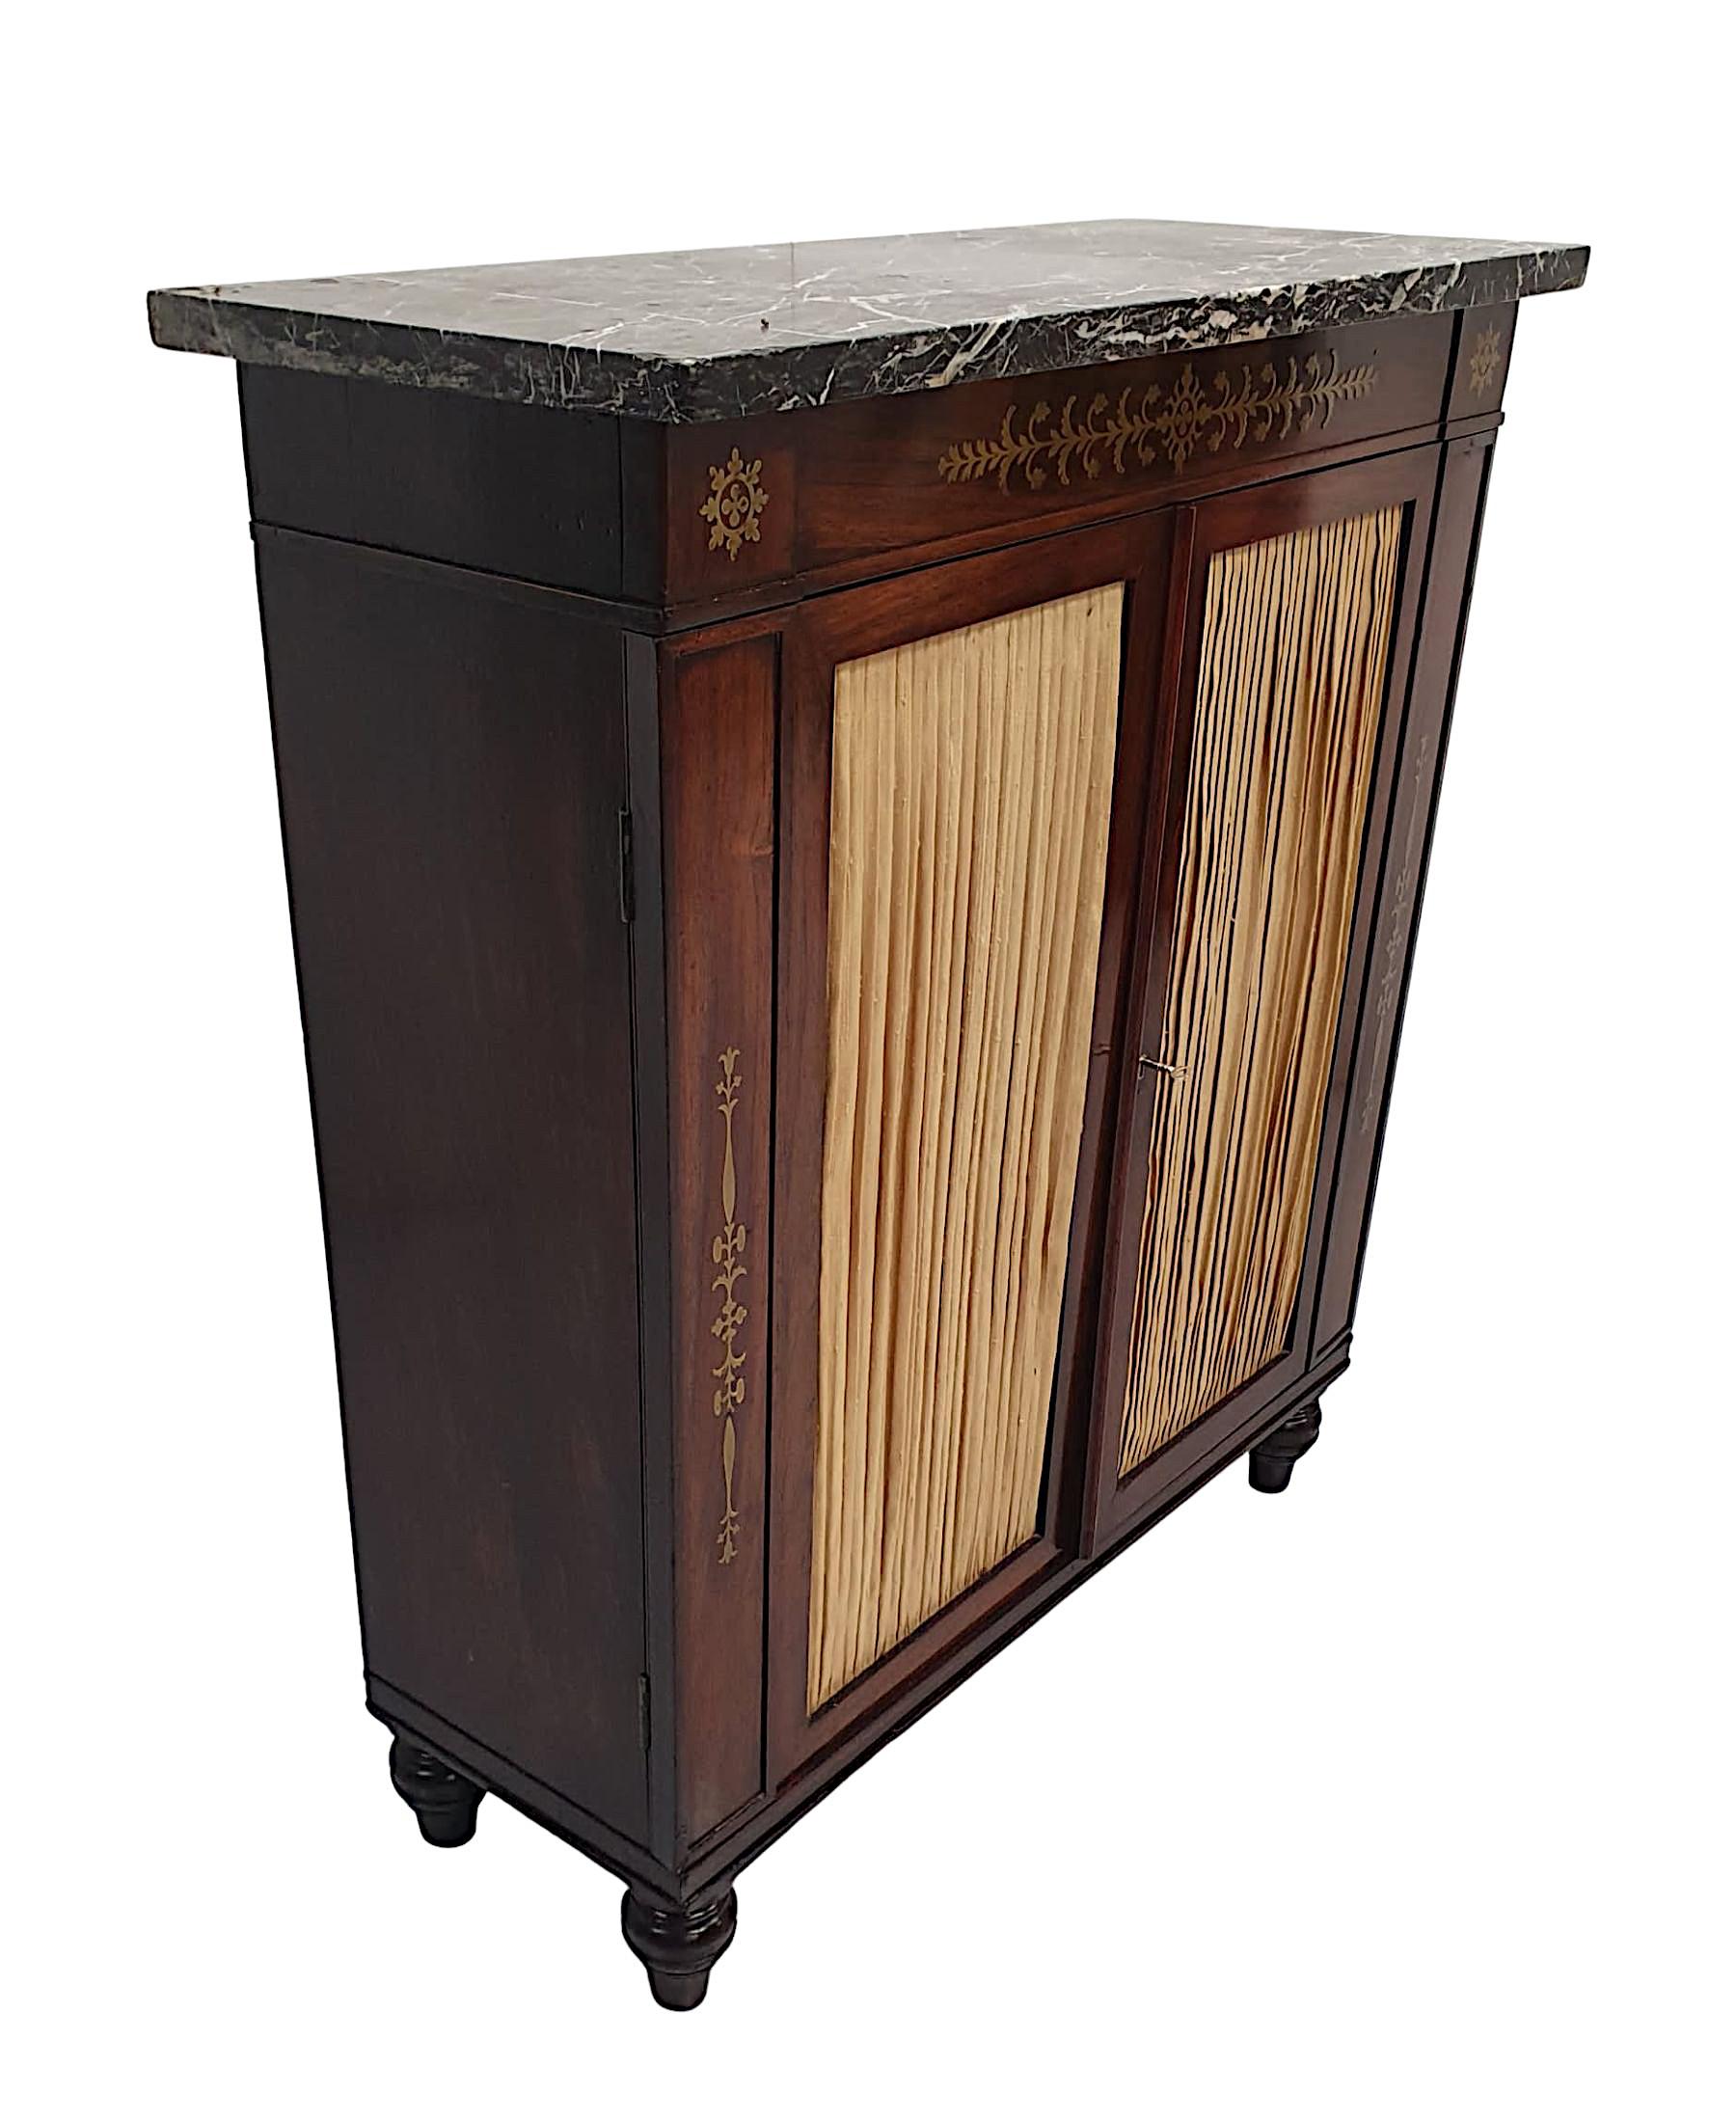 A fine early 19th century Regency fruitwood marble top side cabinet of exceptional quality, beautifully hand carved with rich patination, fine grain and brass mounted throughout. The gorgeous, moulded Marquina Black marble top raised over frieze